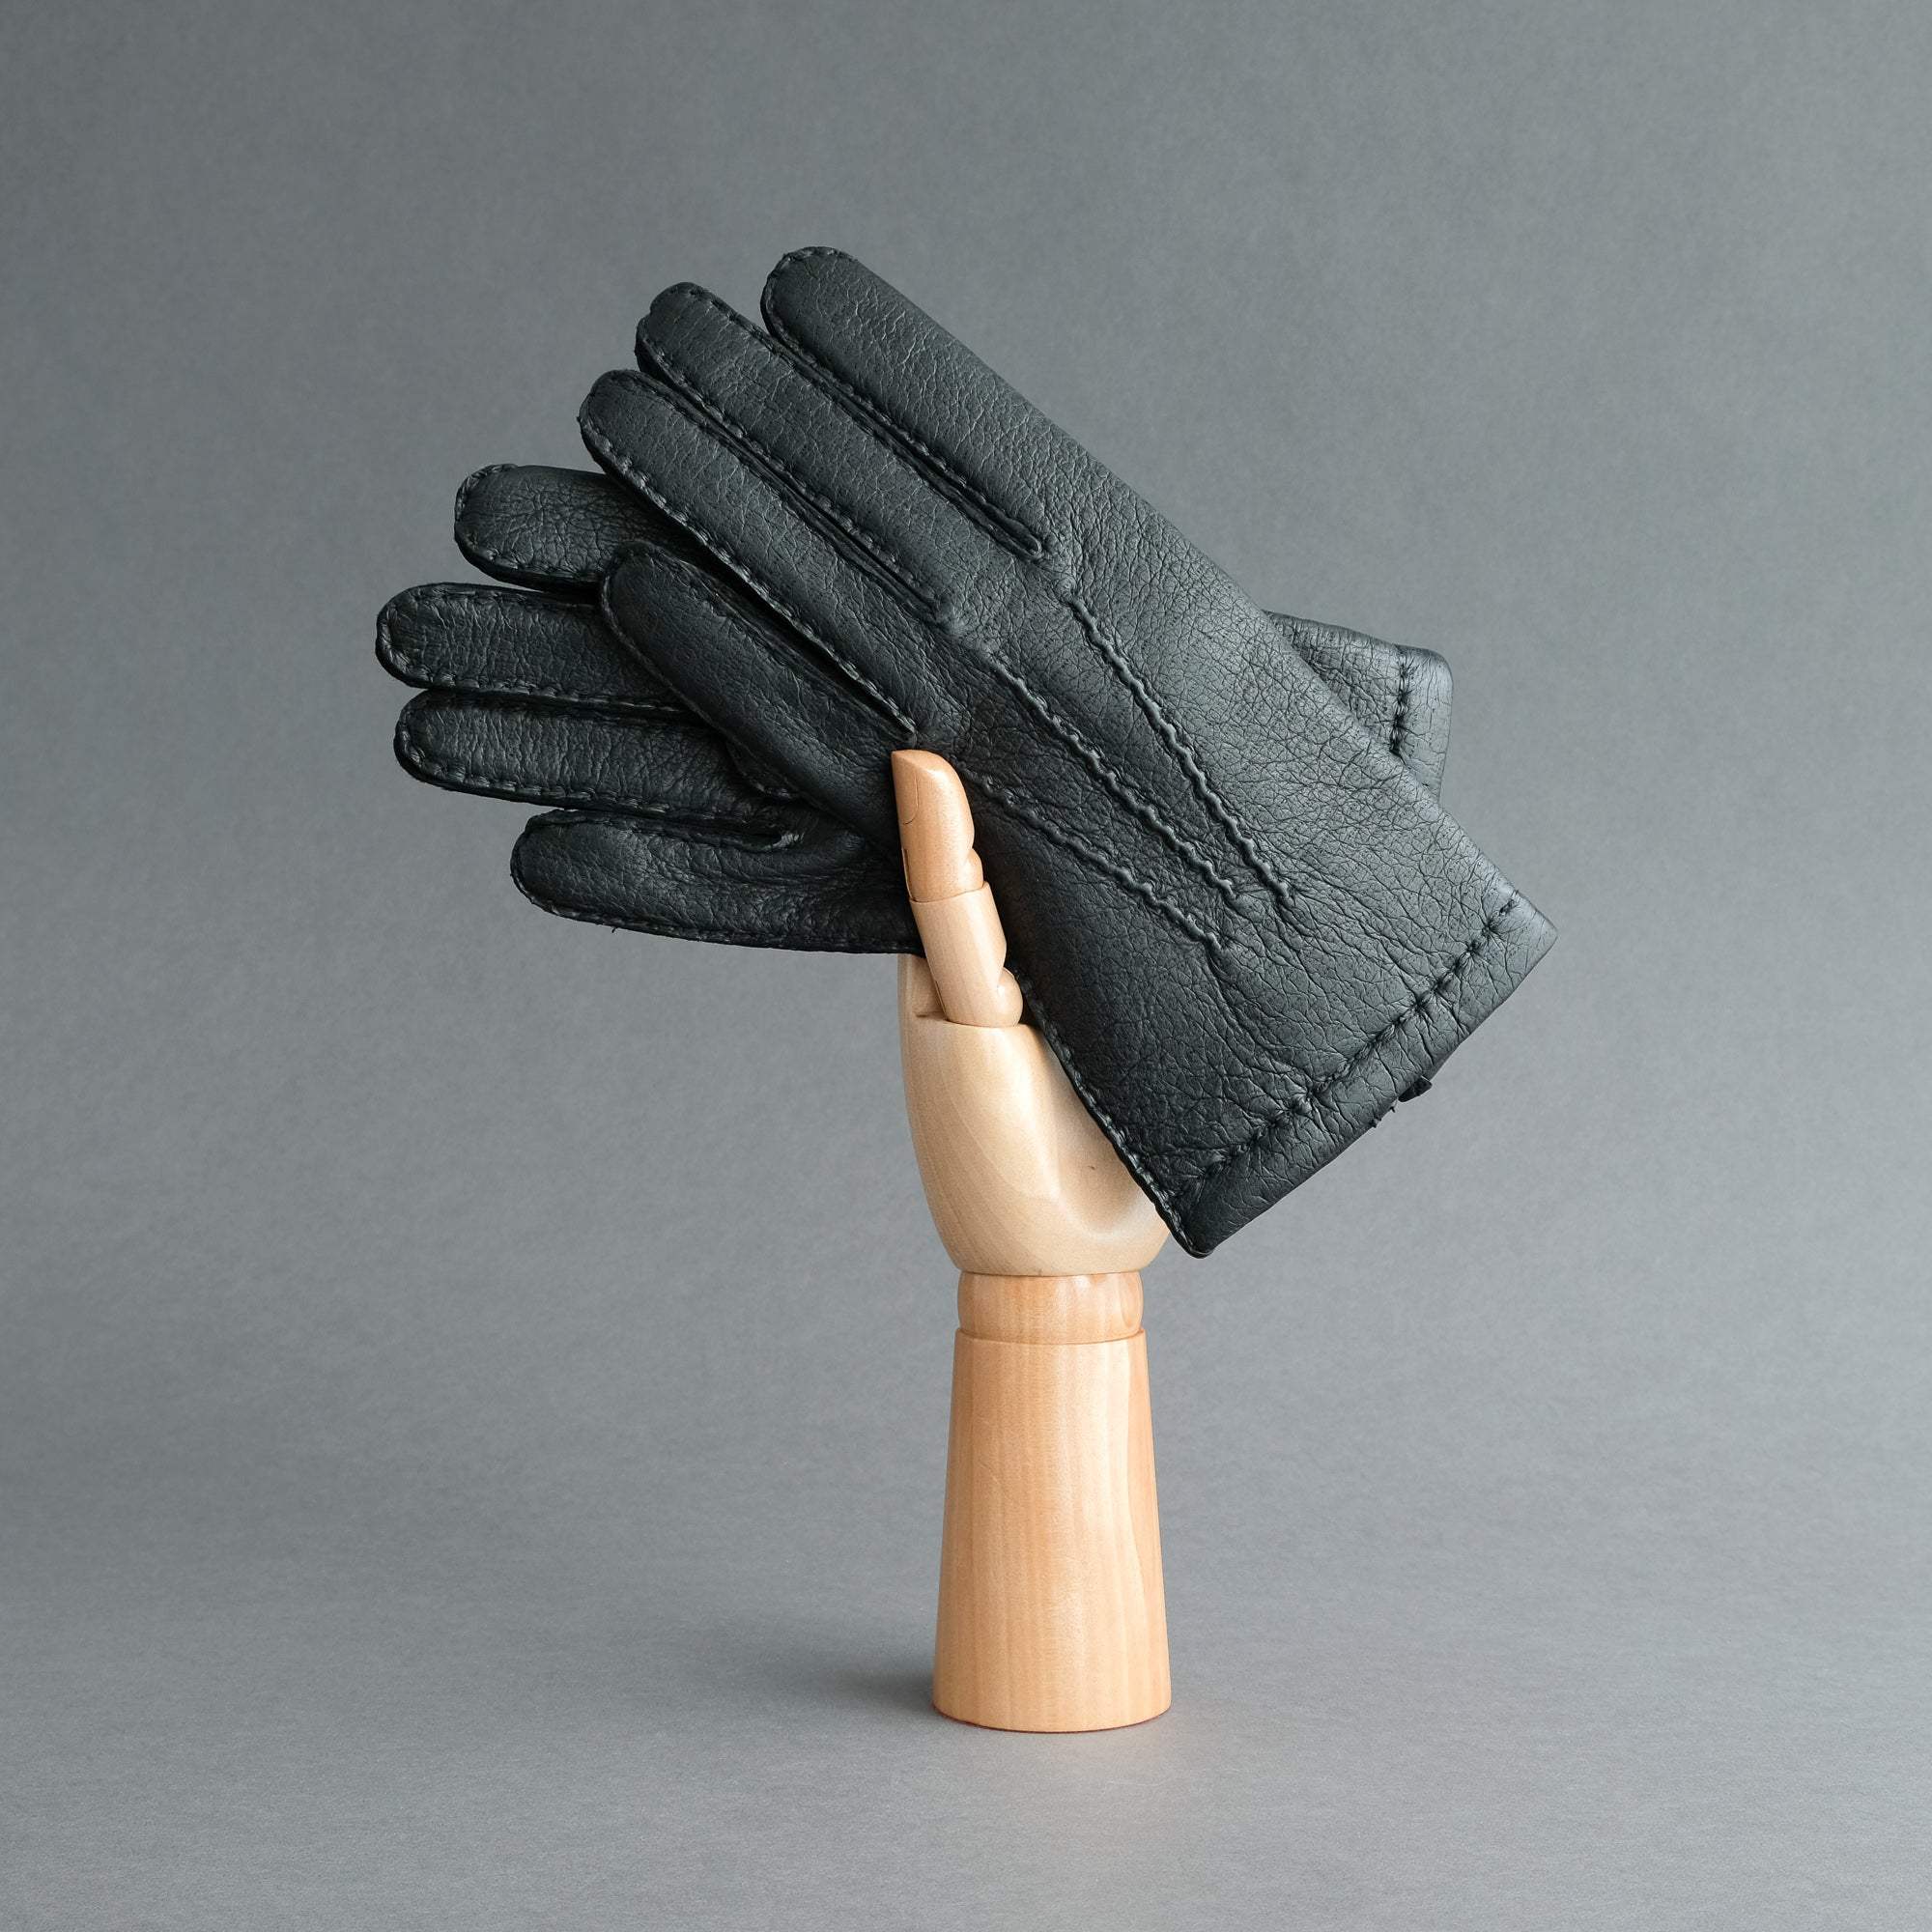 Gentlemen's Gloves from Black Peccary Lined with Cashmere - TR Handschuhe Wien - Thomas Riemer Handmade Gloves